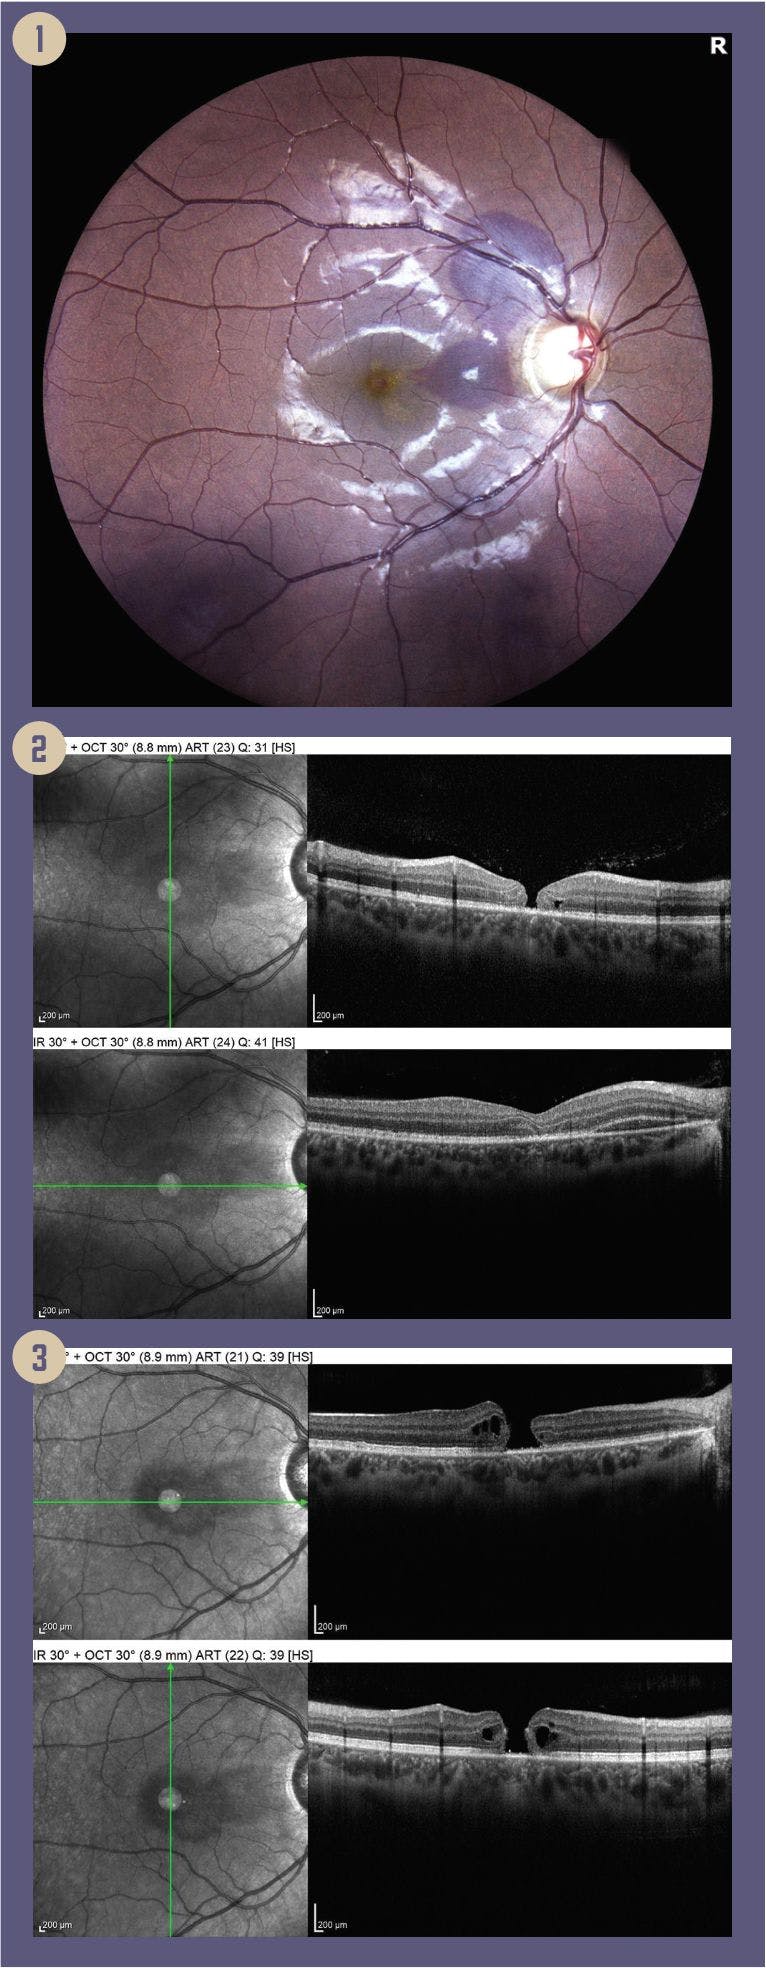 Figures: 1. Traumatic maculopathy, macular hole and subretinal hemorrhage. 2: Macular hole, subretinal hemorrhage, loss of photoreceptor layer. 3: OCT 2 months later, with enlargement of macular hole.